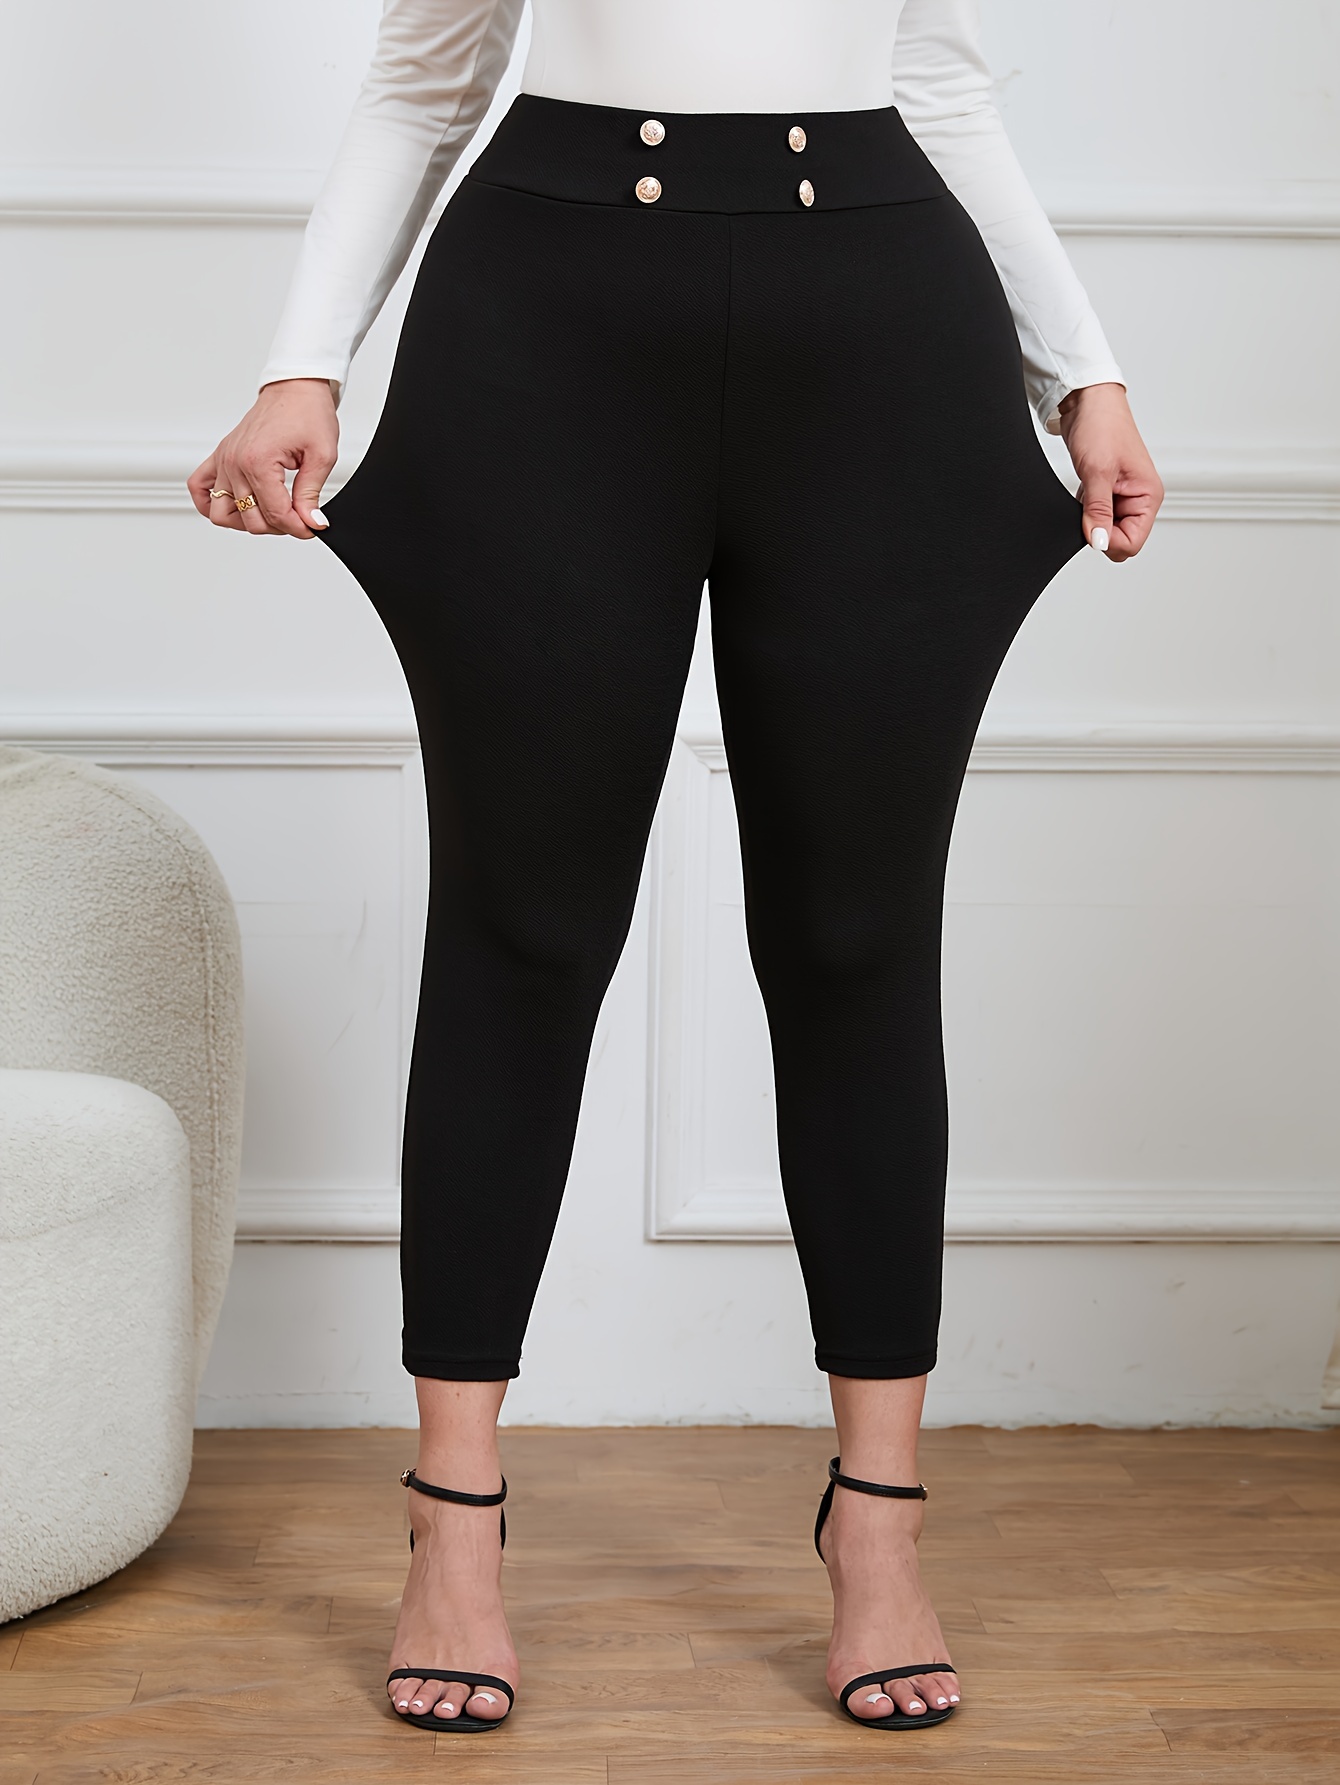 KIMCURVY Business Casual Plus Size Black Bell Bottom Trousers for Women  with Pockets for Work Black 16W at  Women's Clothing store